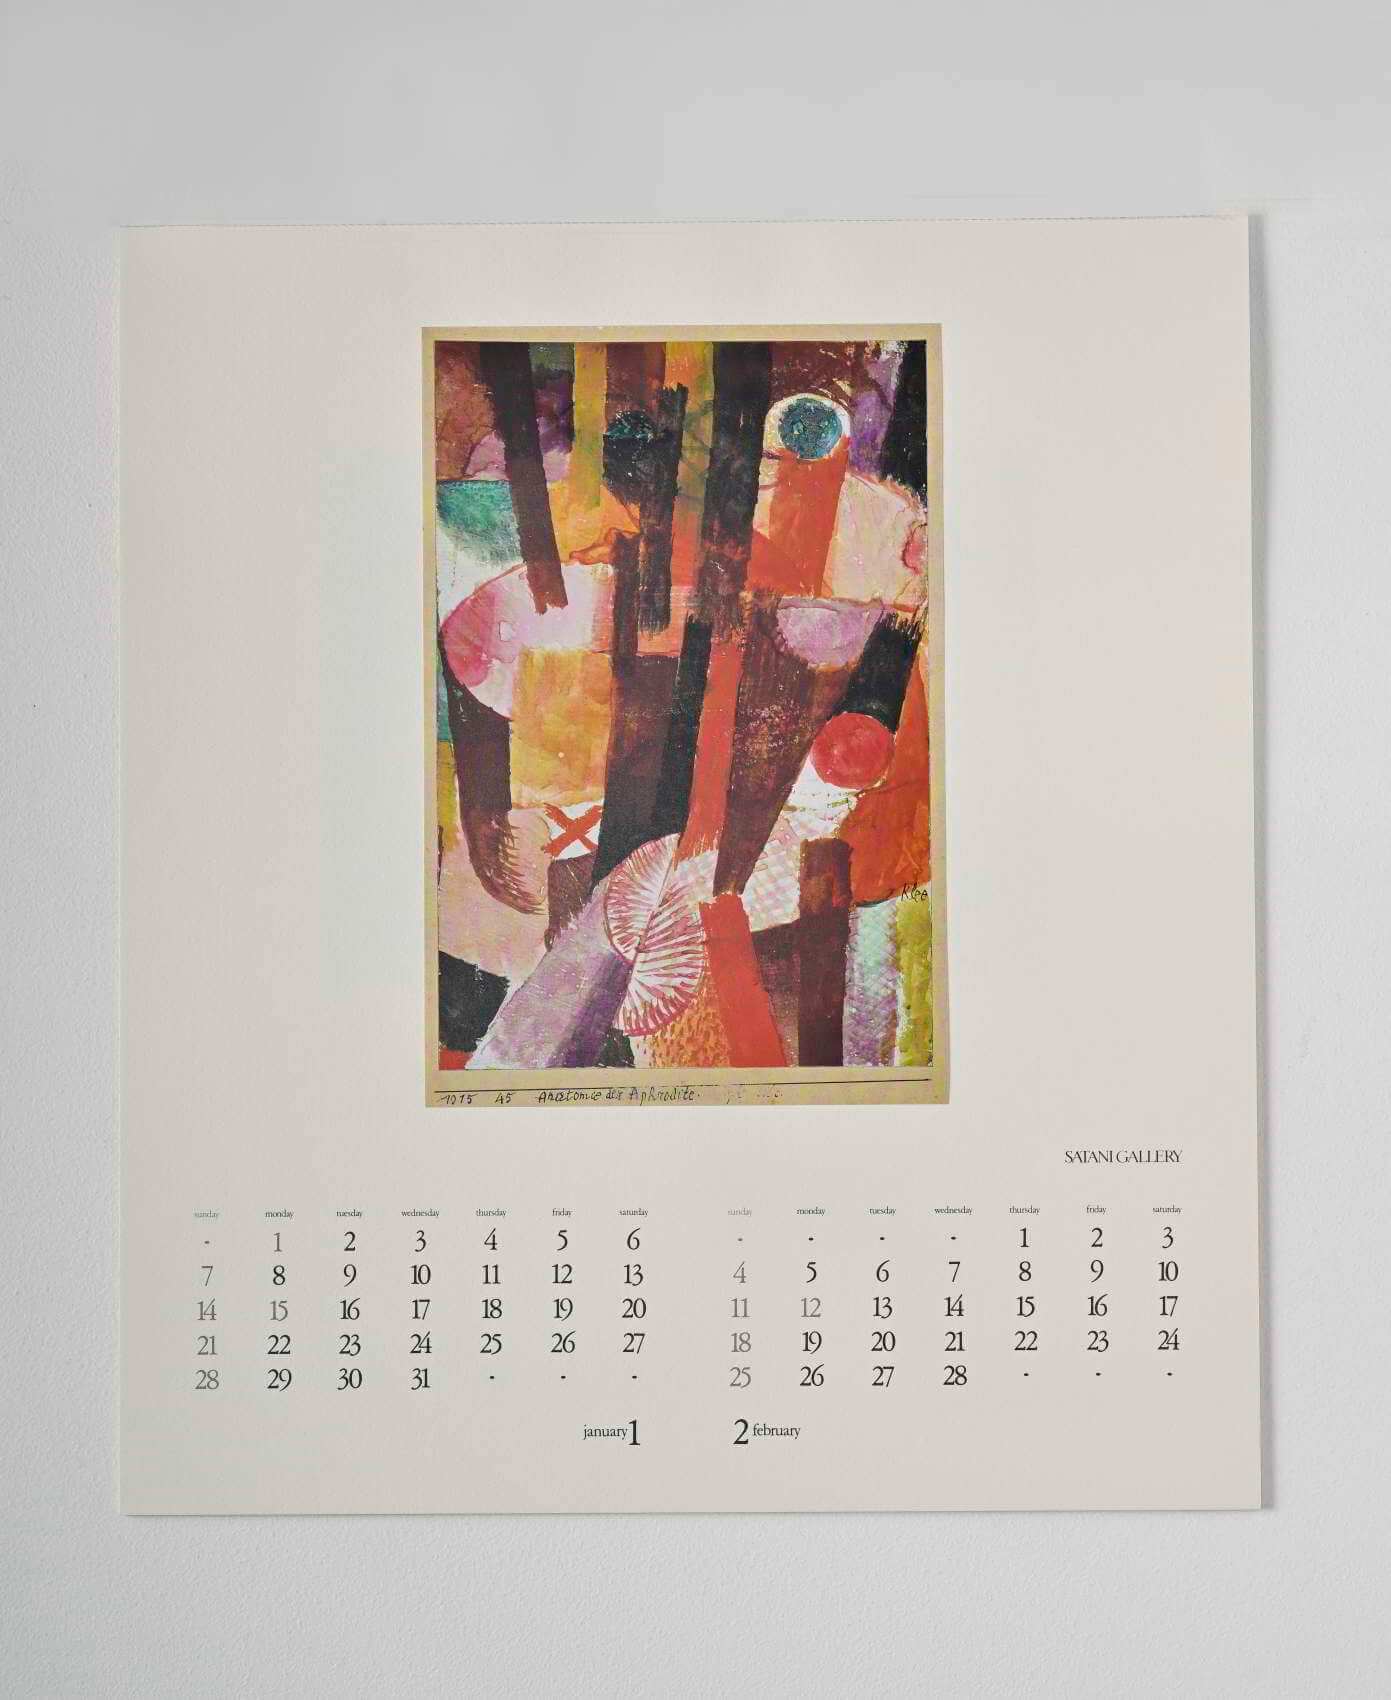 Calendar published at the occation of the Klee exhibition